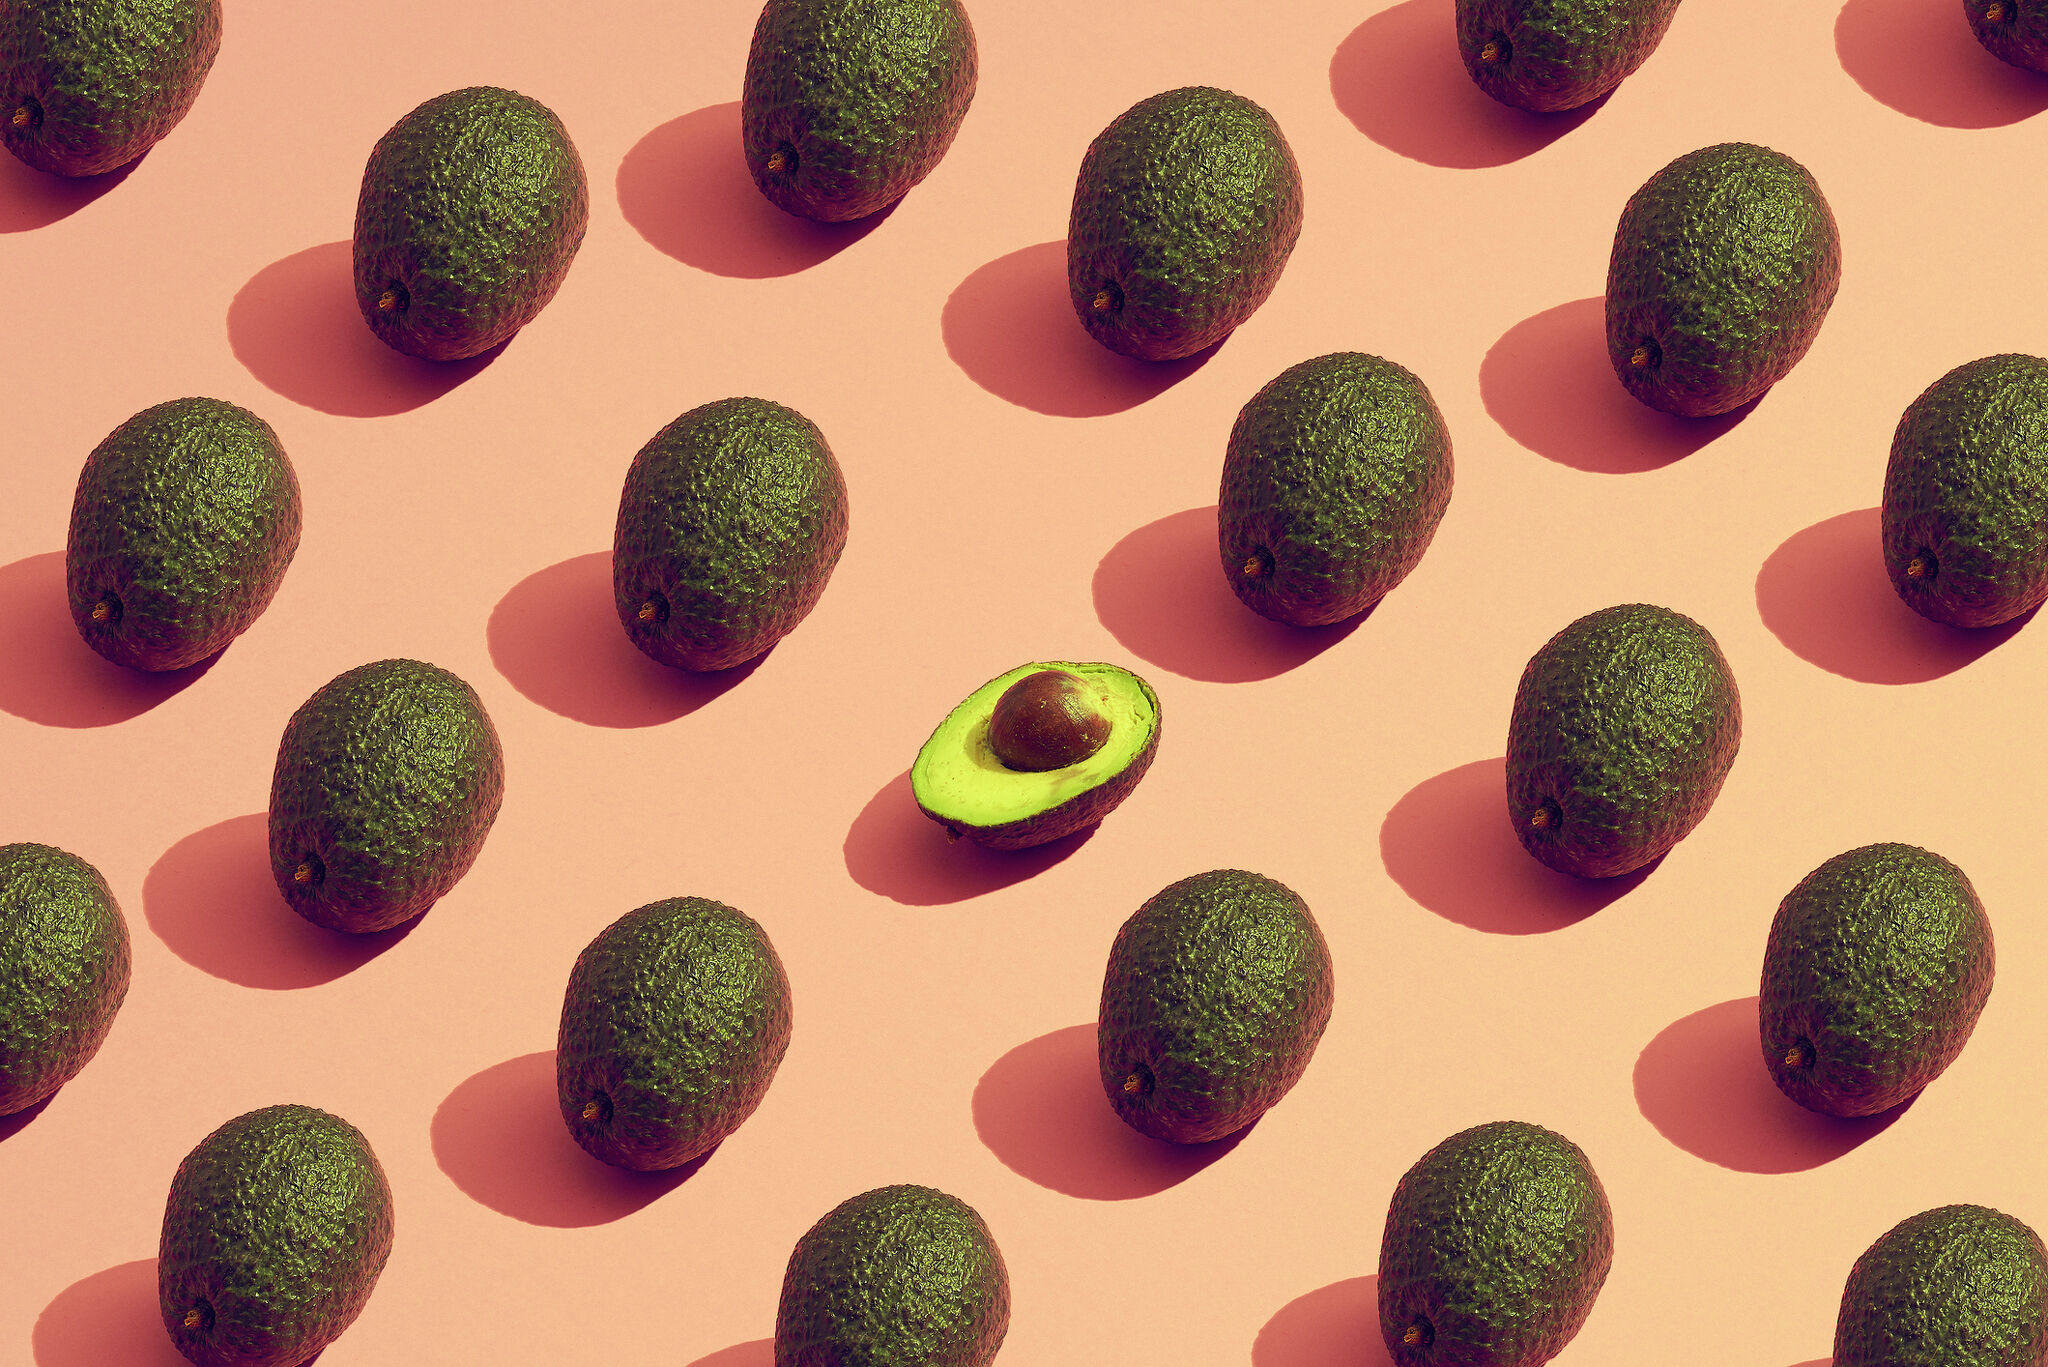 Health benefits of avocado, according to a dietitian